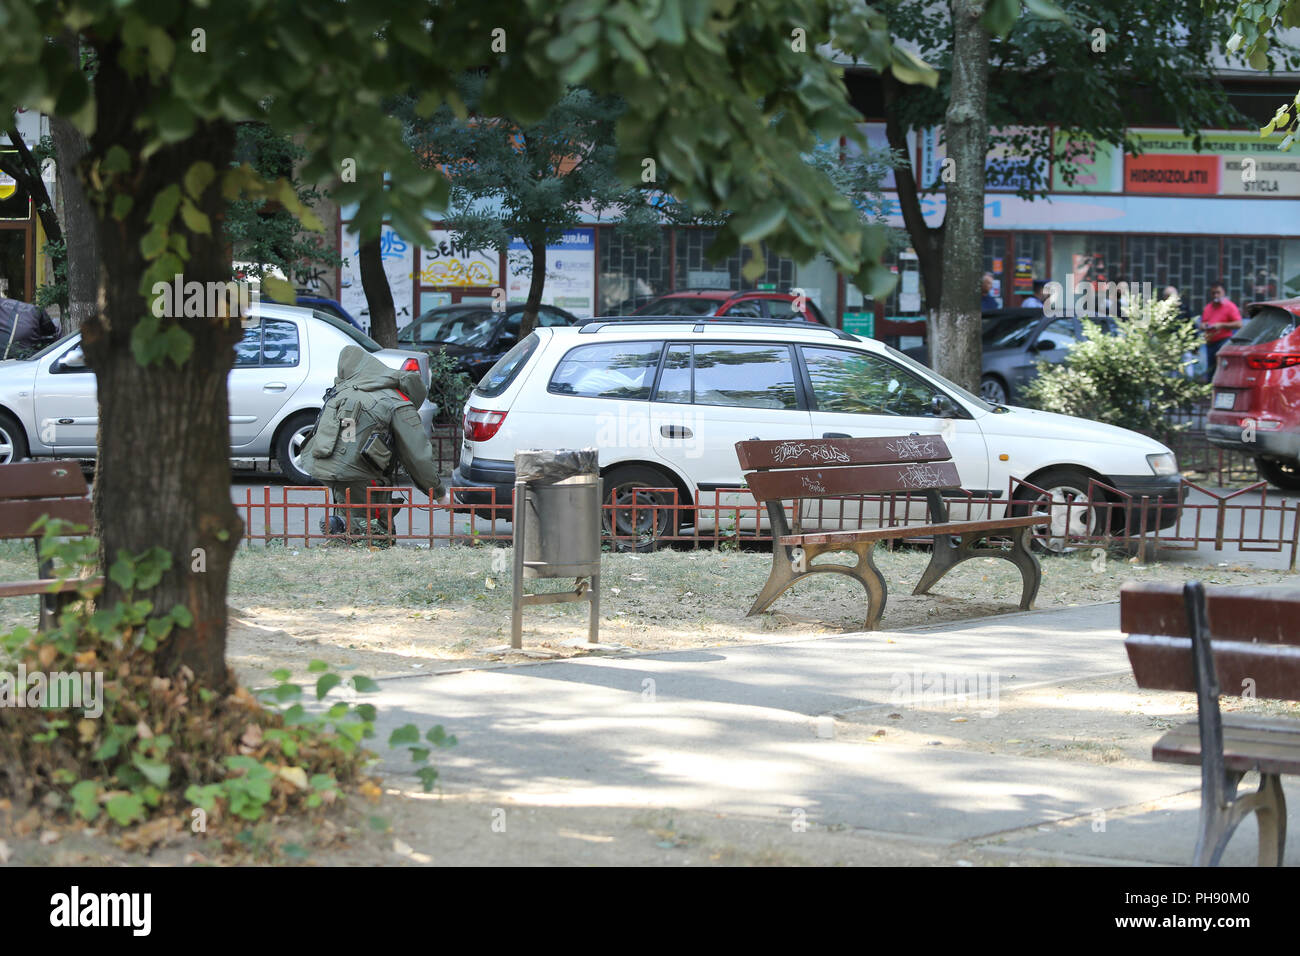 BUCHAREST, ROMANIA - August 31, 2018: Bomb Disposal Expert in Bomb suit for Explosive ordnance disposal (EOD) is verifying a suspect car on a street i Stock Photo